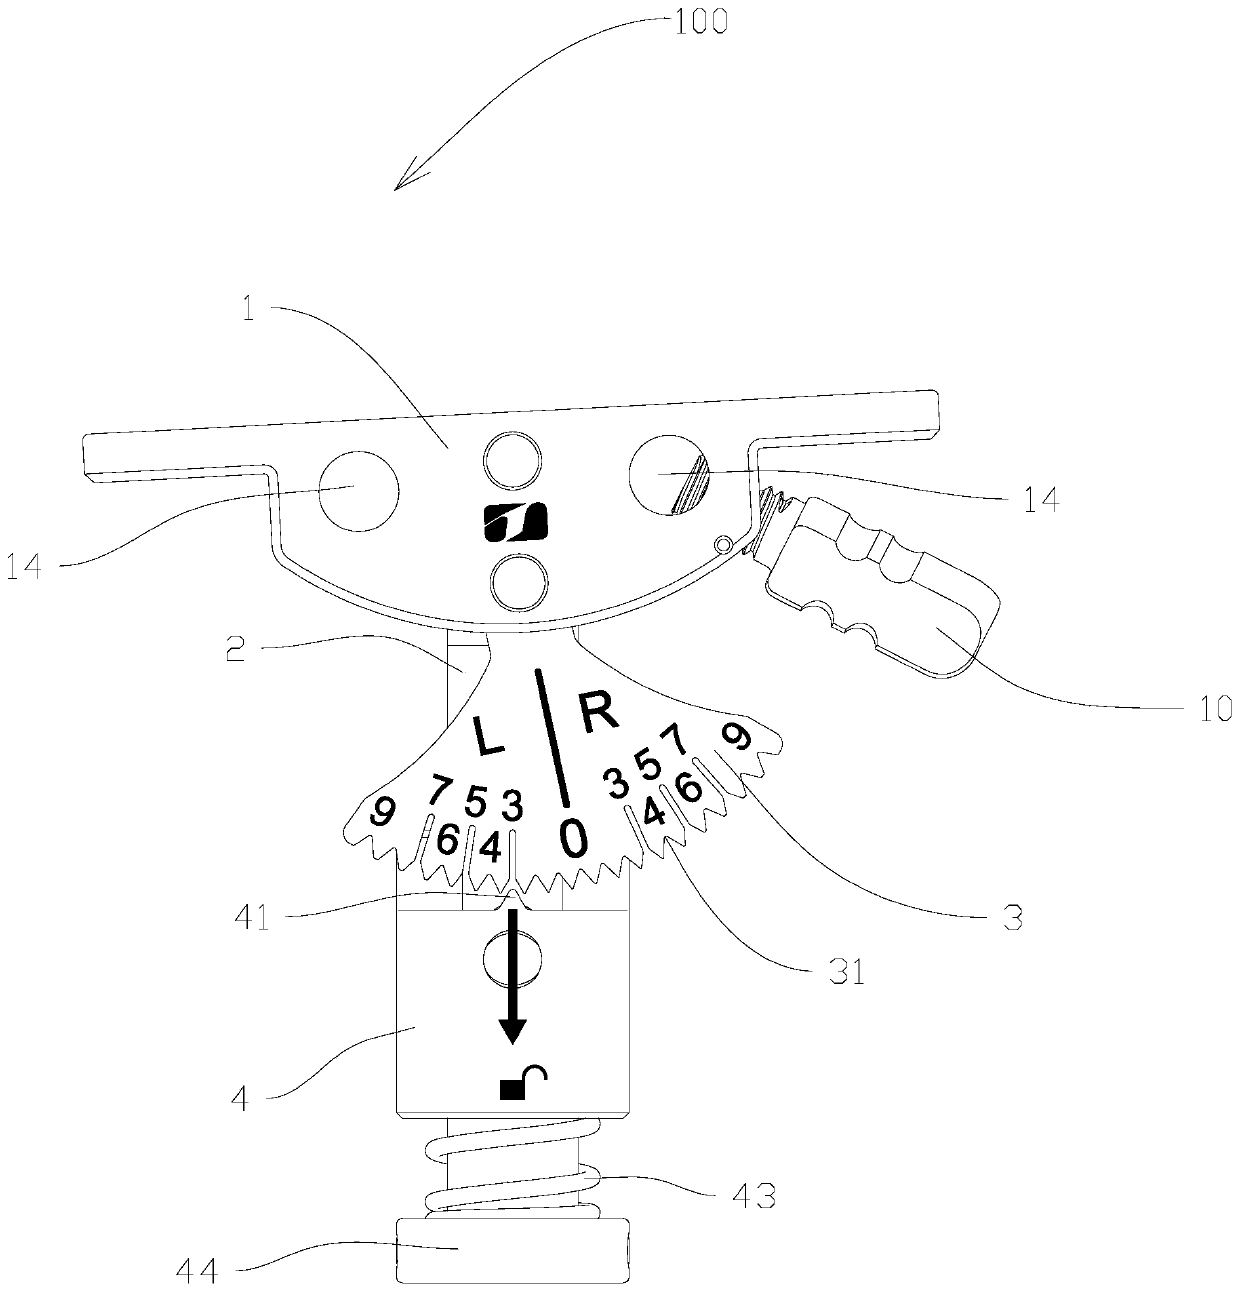 Distal femoral osteotomy alignment and positioning device